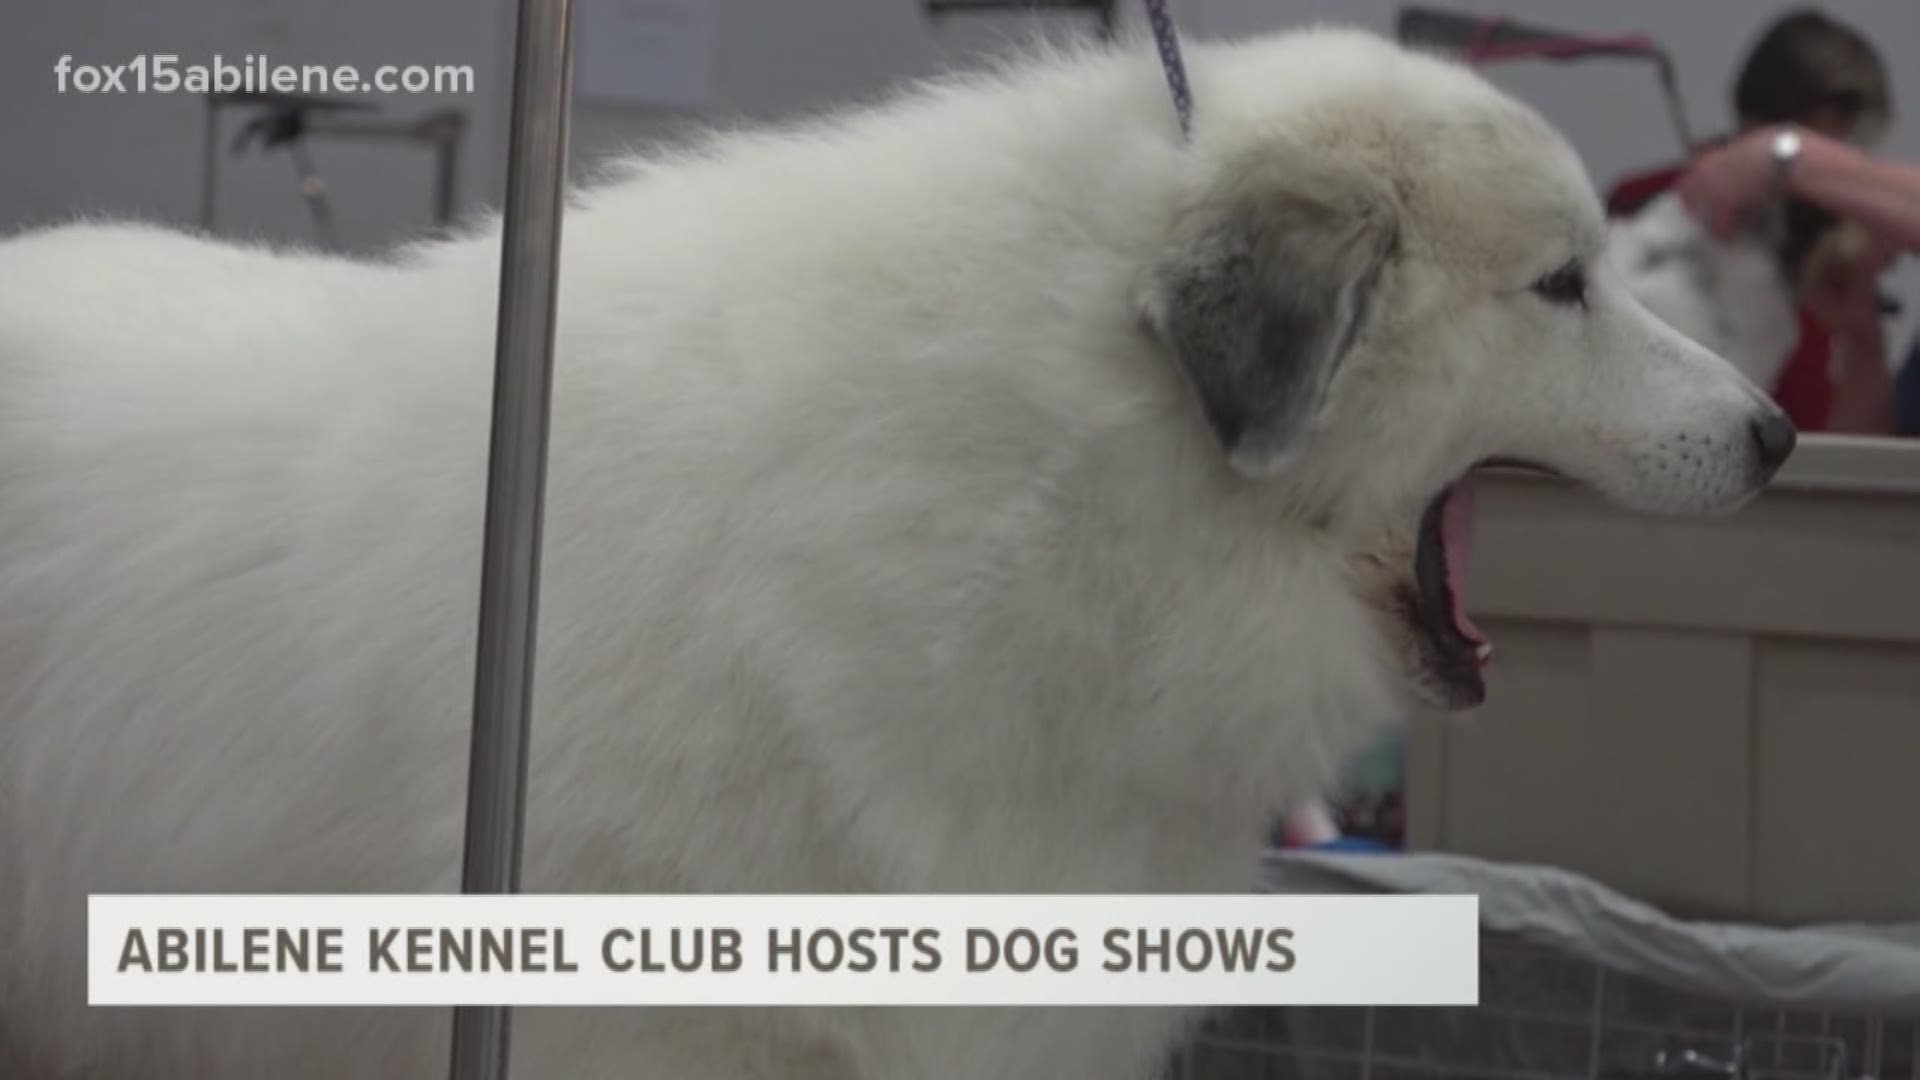 Hundreds of purebred dogs from around the country are in Abilene for dog shows. 